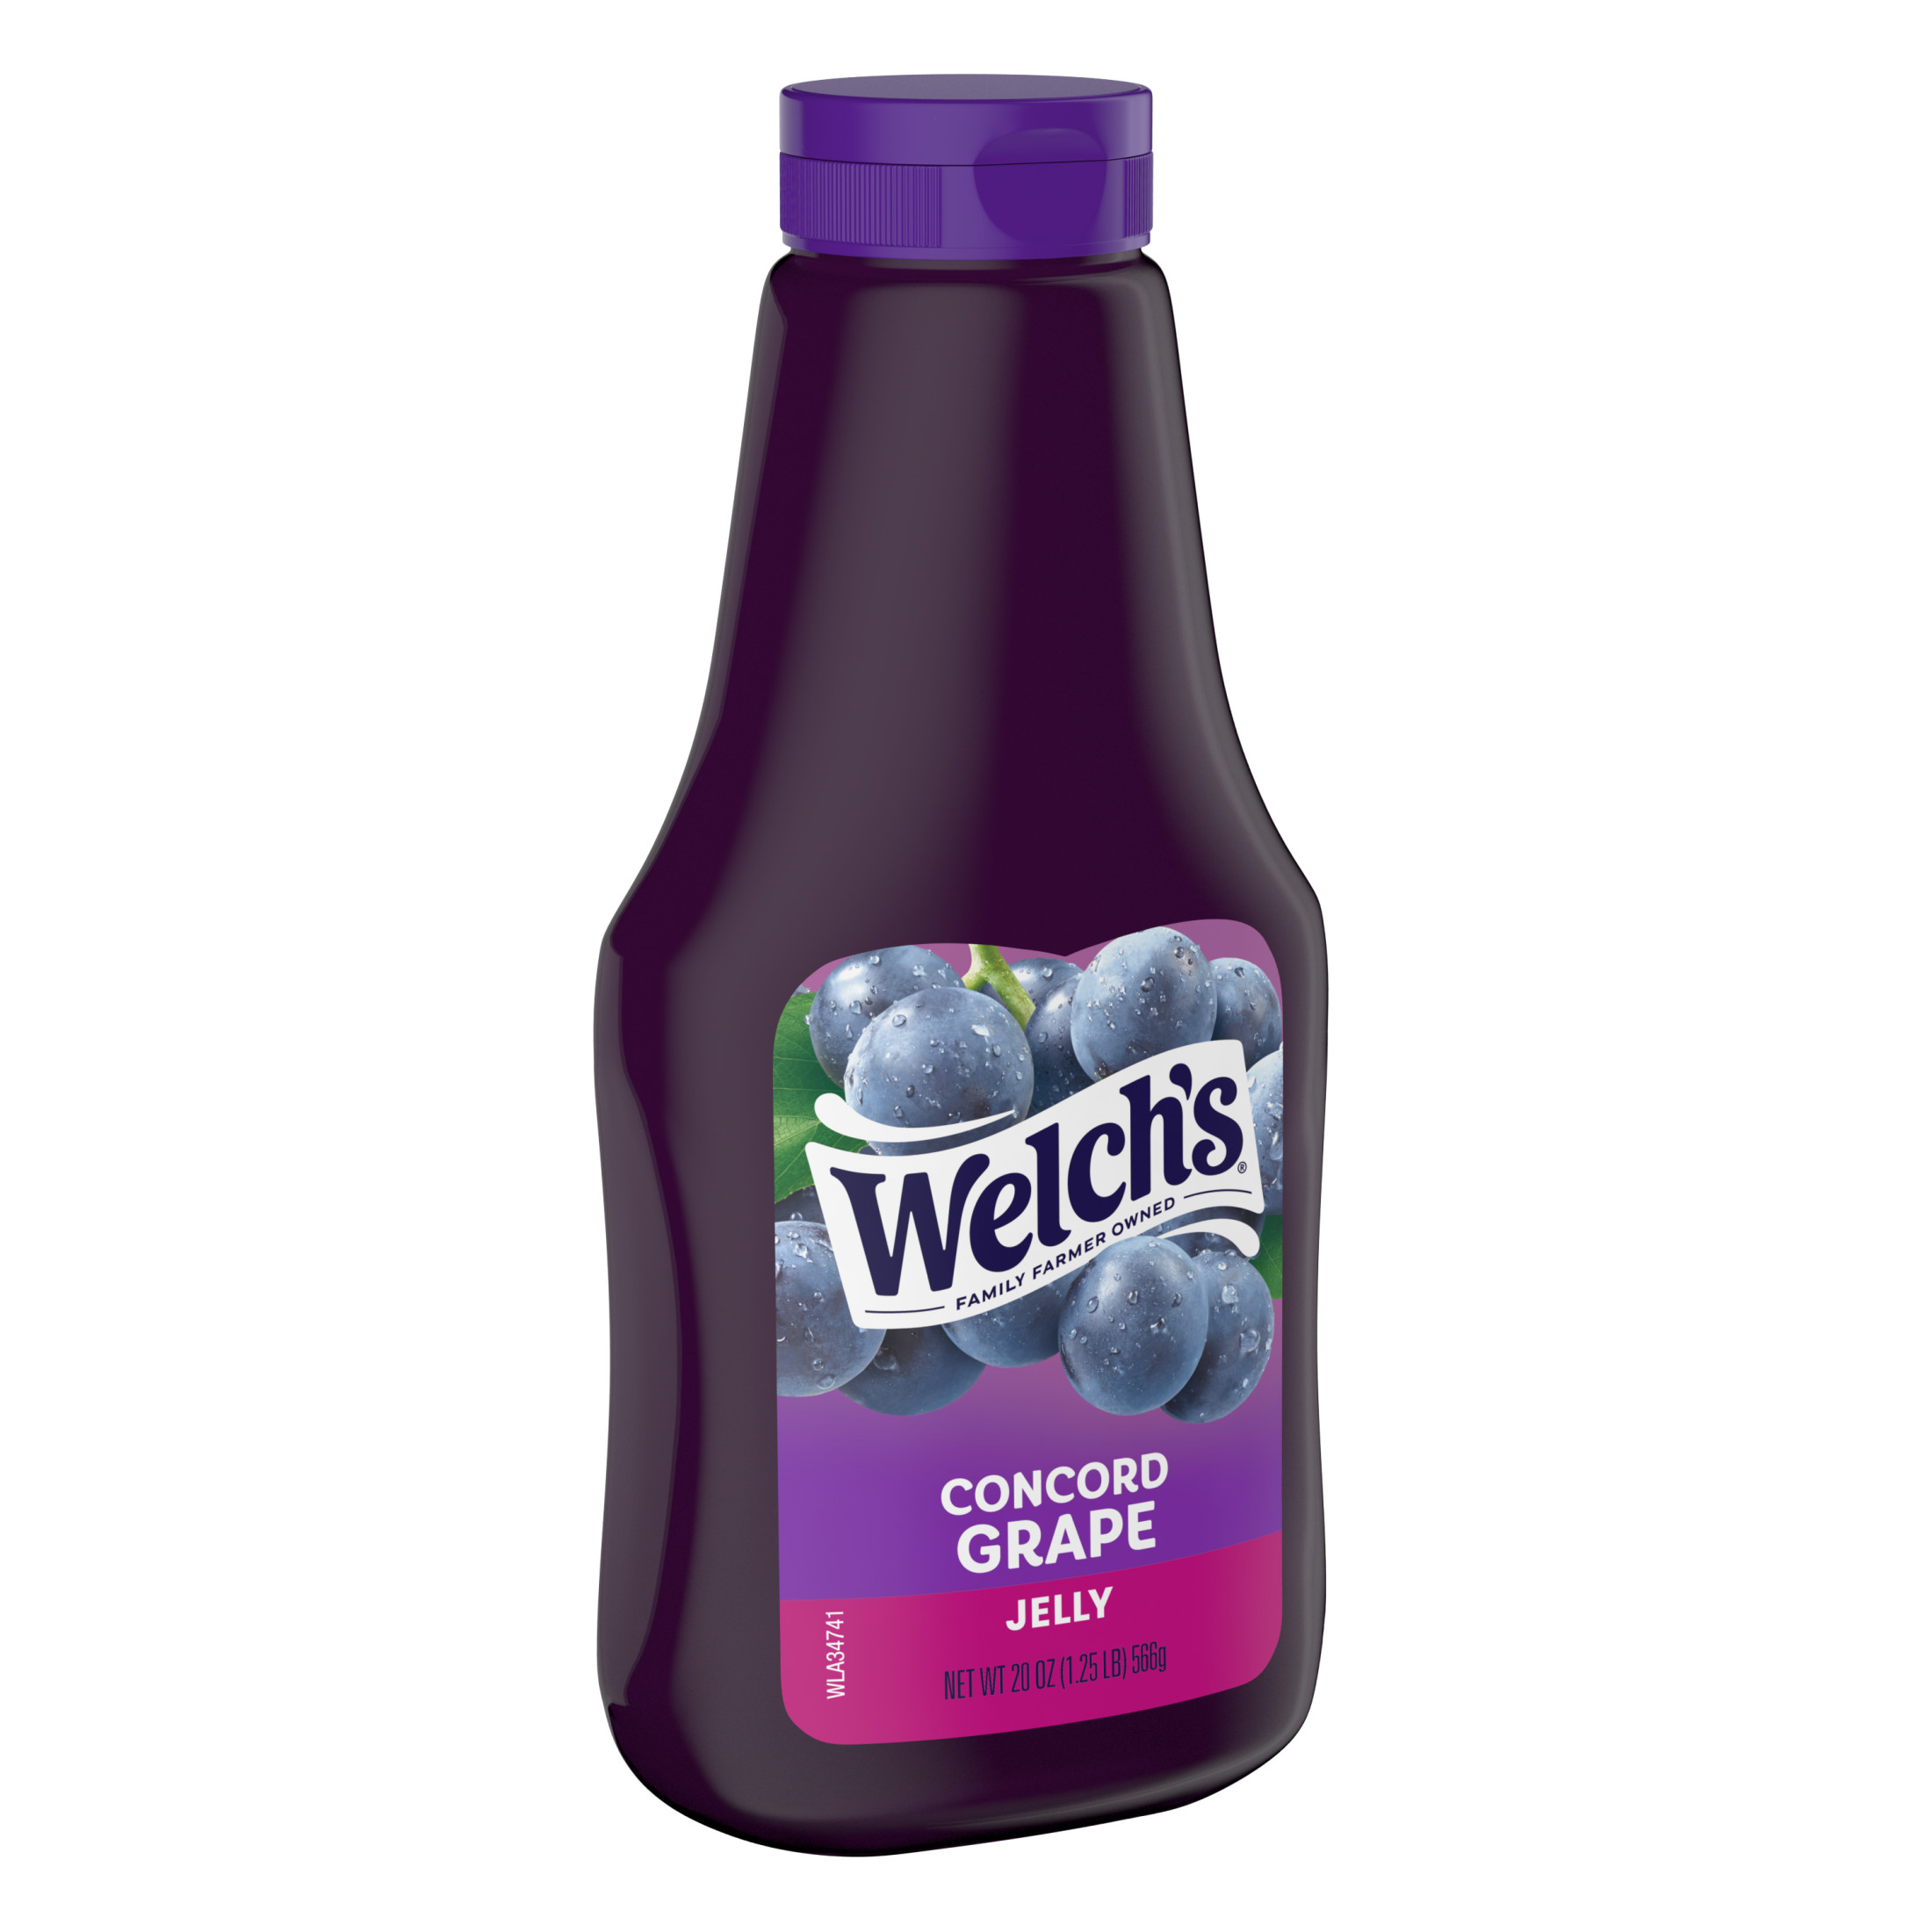 Welch's Concord Grape Jelly, 20 oz Squeeze Bottle - image 3 of 6